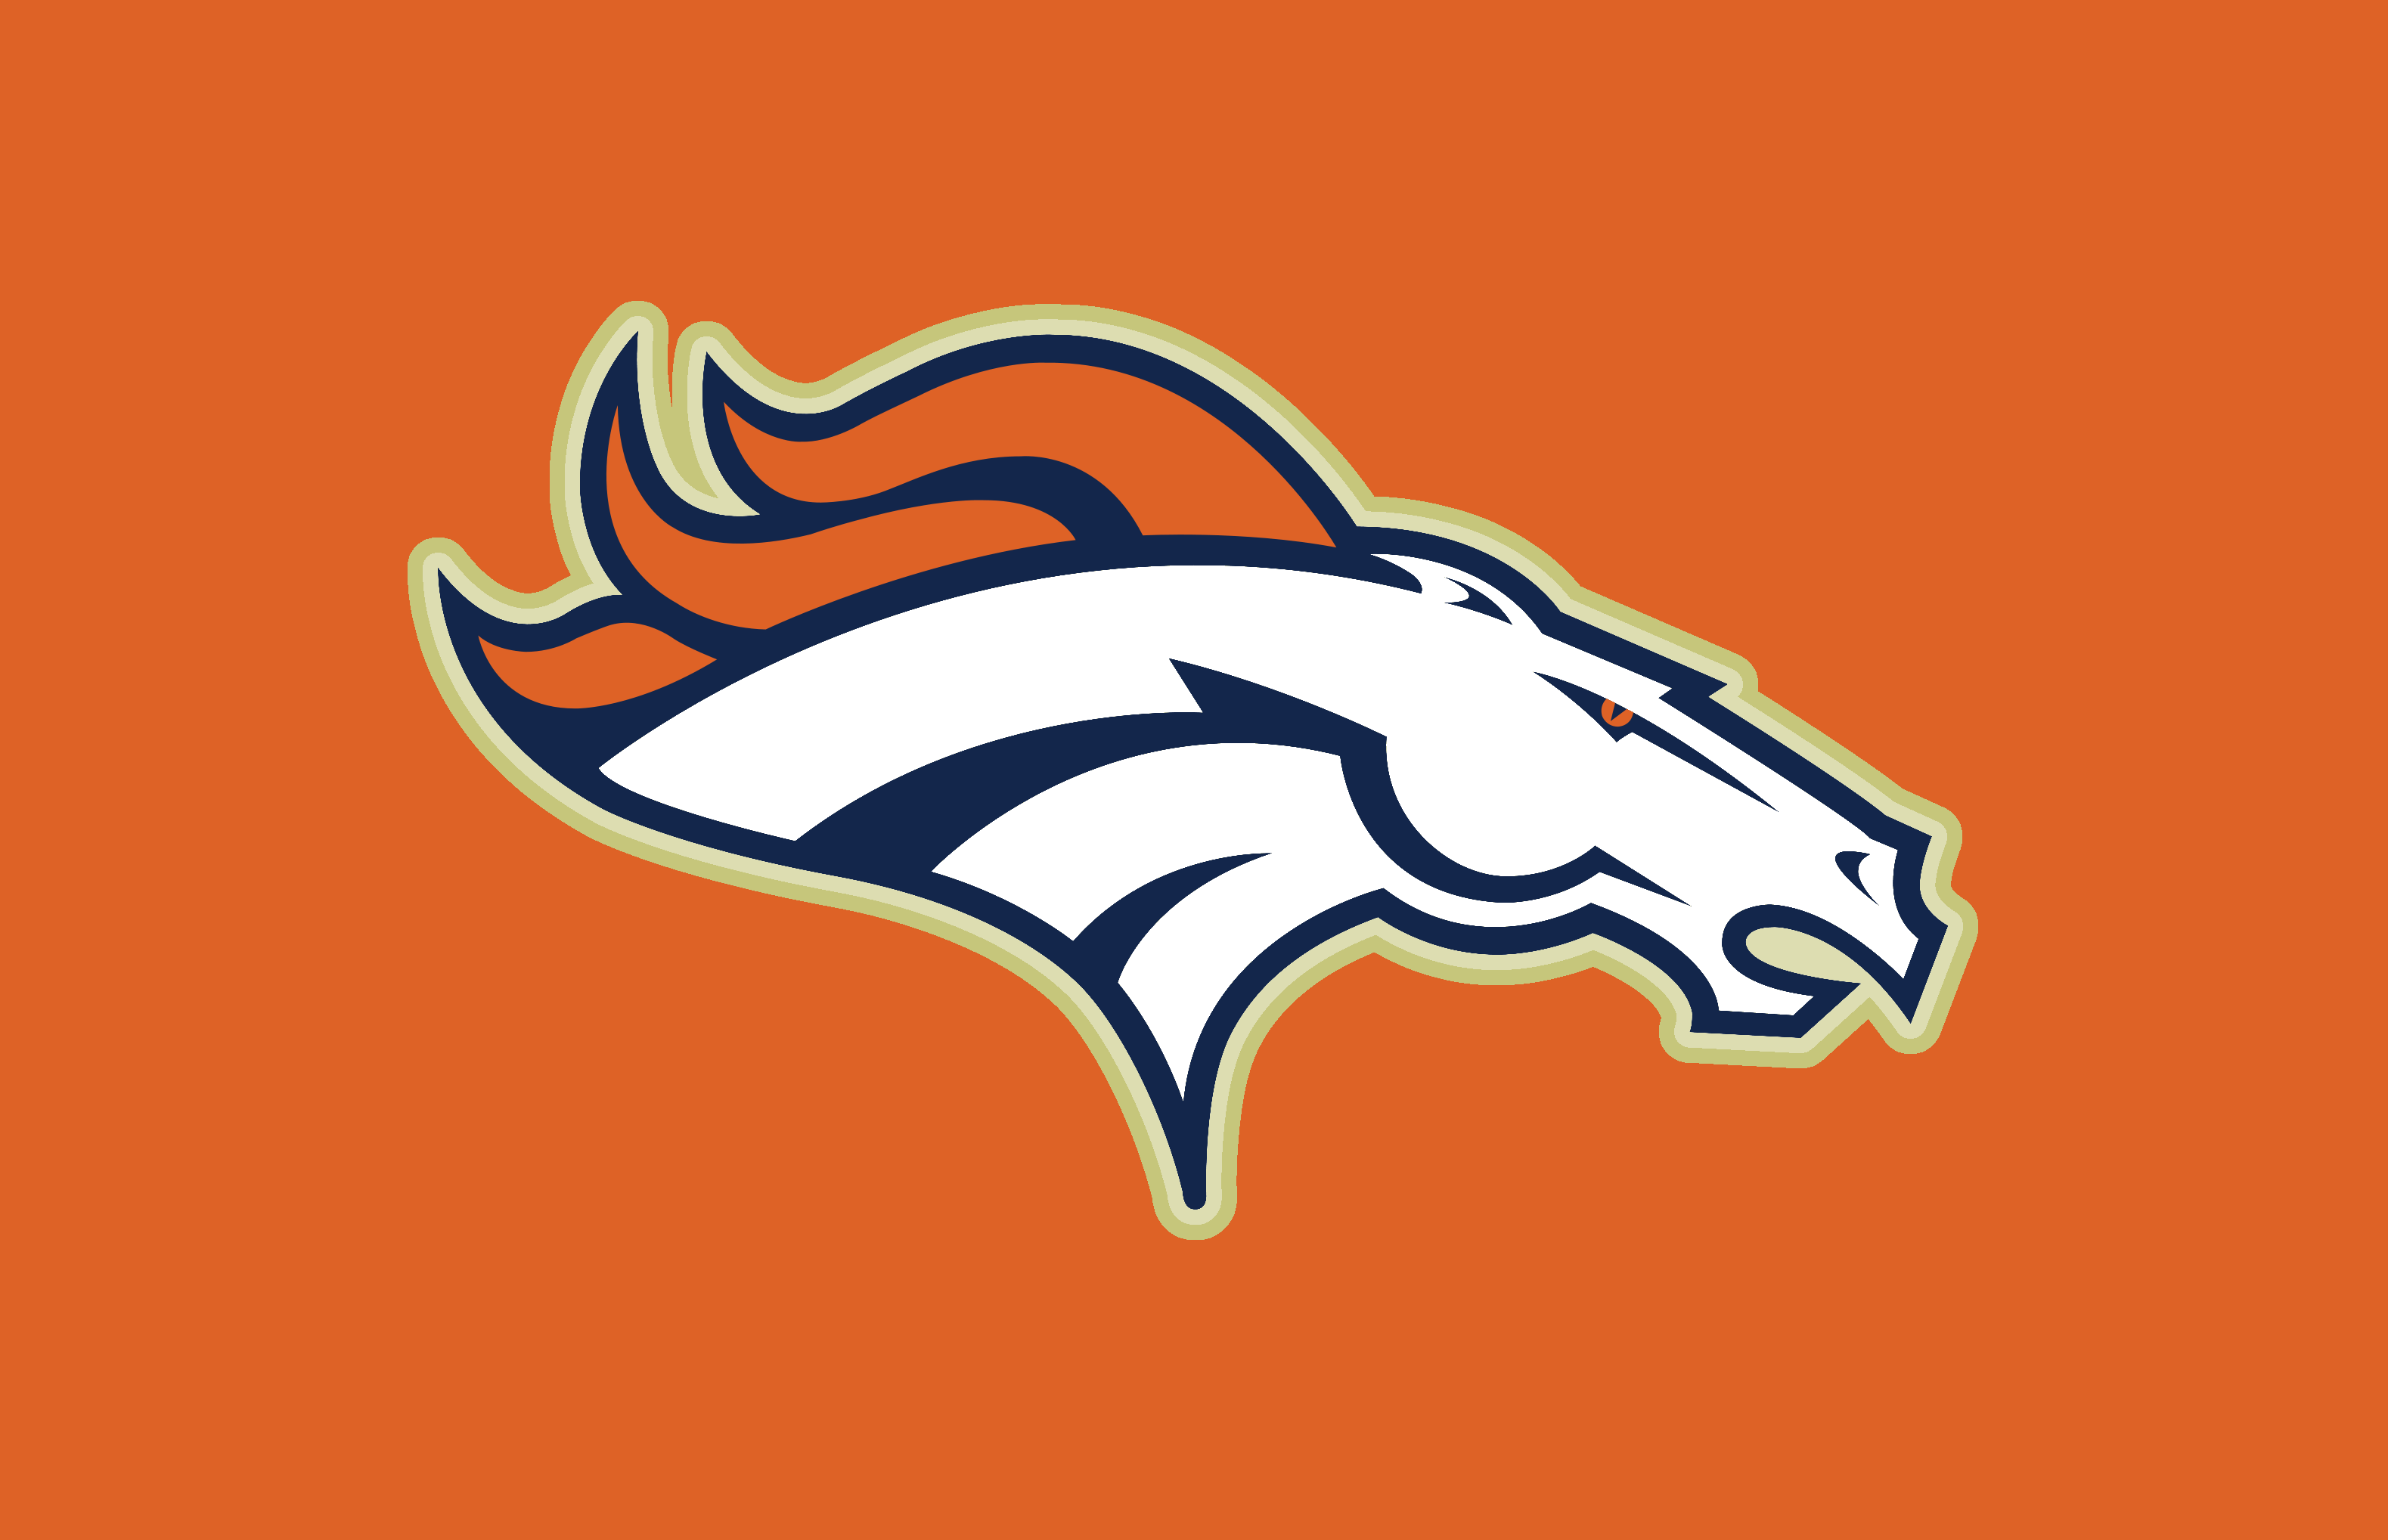 Orange and Gold Logo - As part of the league wide celebration of the 50th Super Bowl 